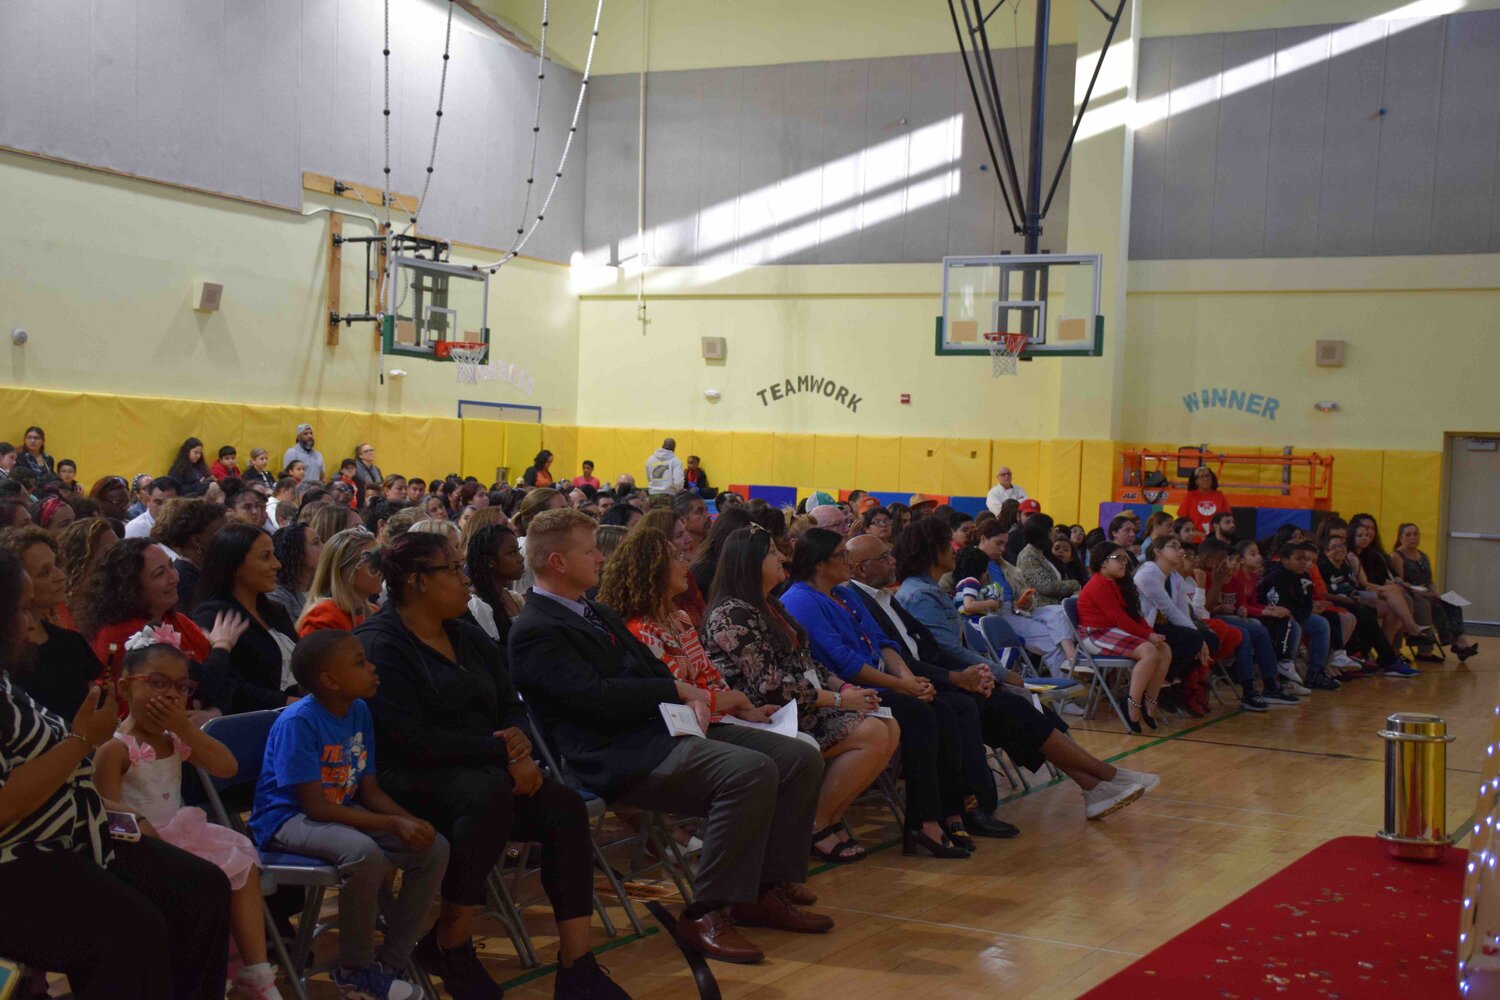 During the 20th anniversary ceremony of New Visions School, the Freeport Public School administration, Board of Education members, staff, students, and their families gathered to watch a captivating slideshow presentation.